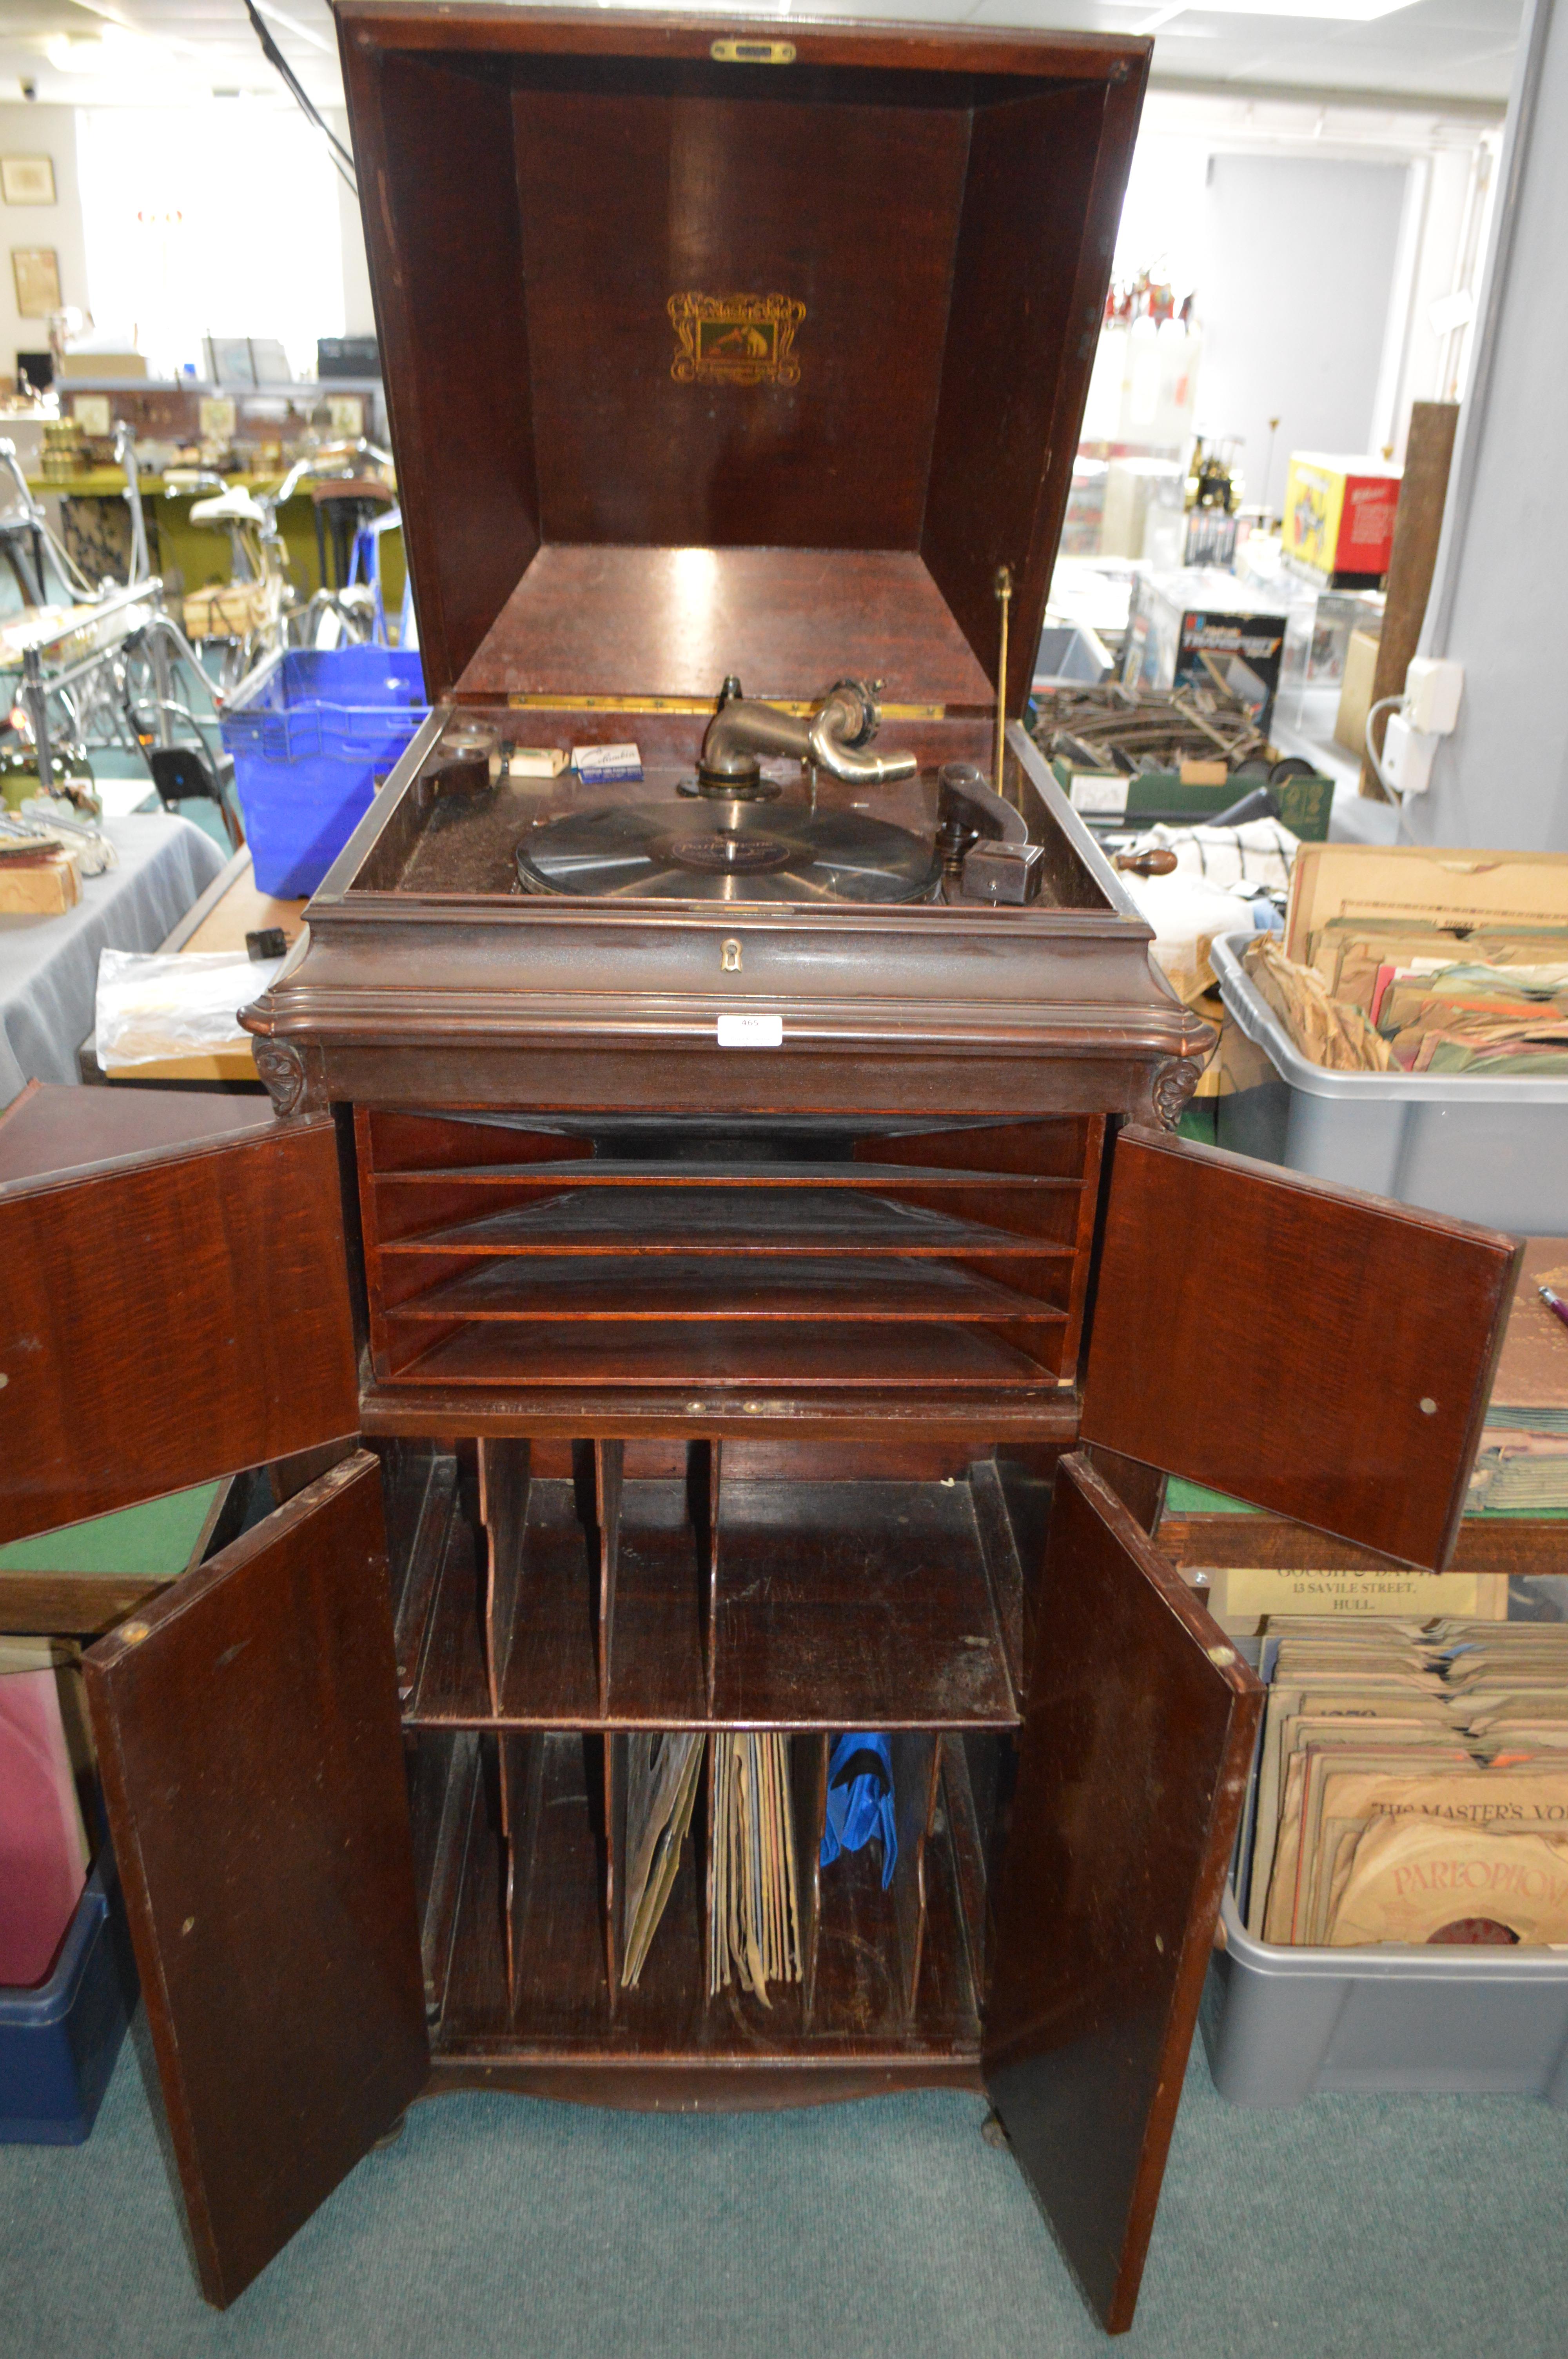 HMV Windup Gramophone Cabinet with 78rpm Records - Image 2 of 5